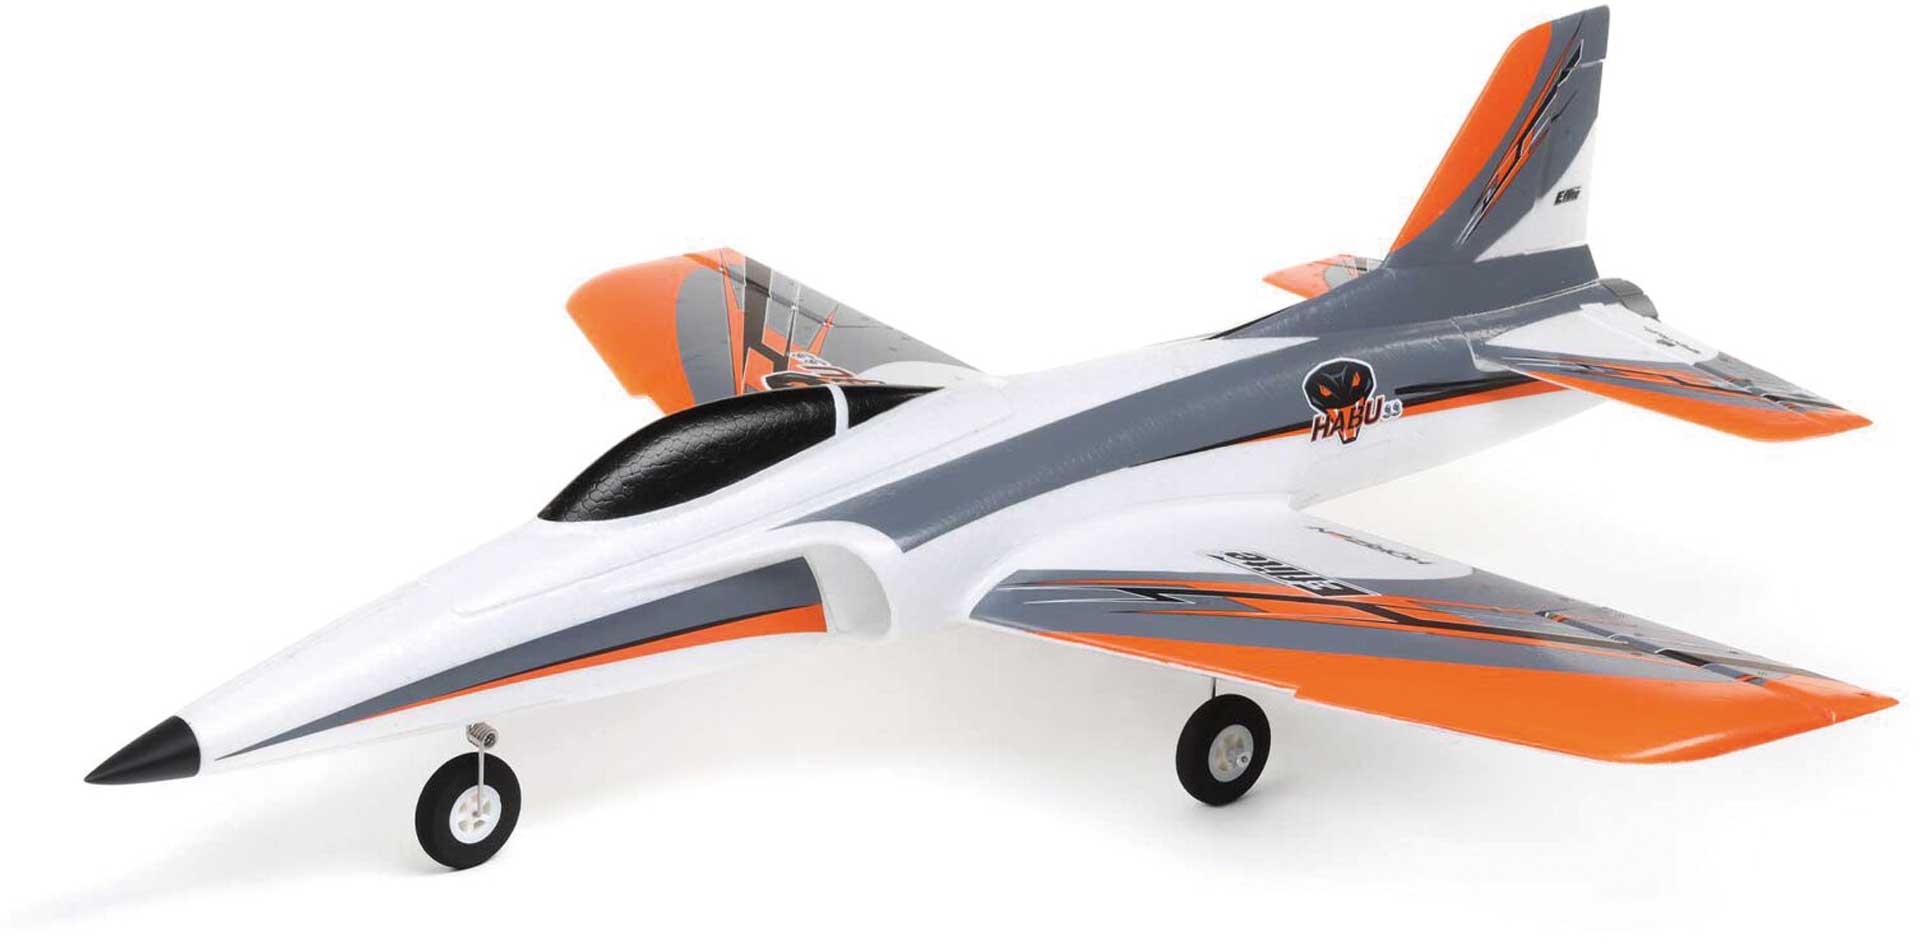 E-FLITE Habu SS (Super Sport) 50mm EDF Jet BNF Basic with SAFE Select and AS3X